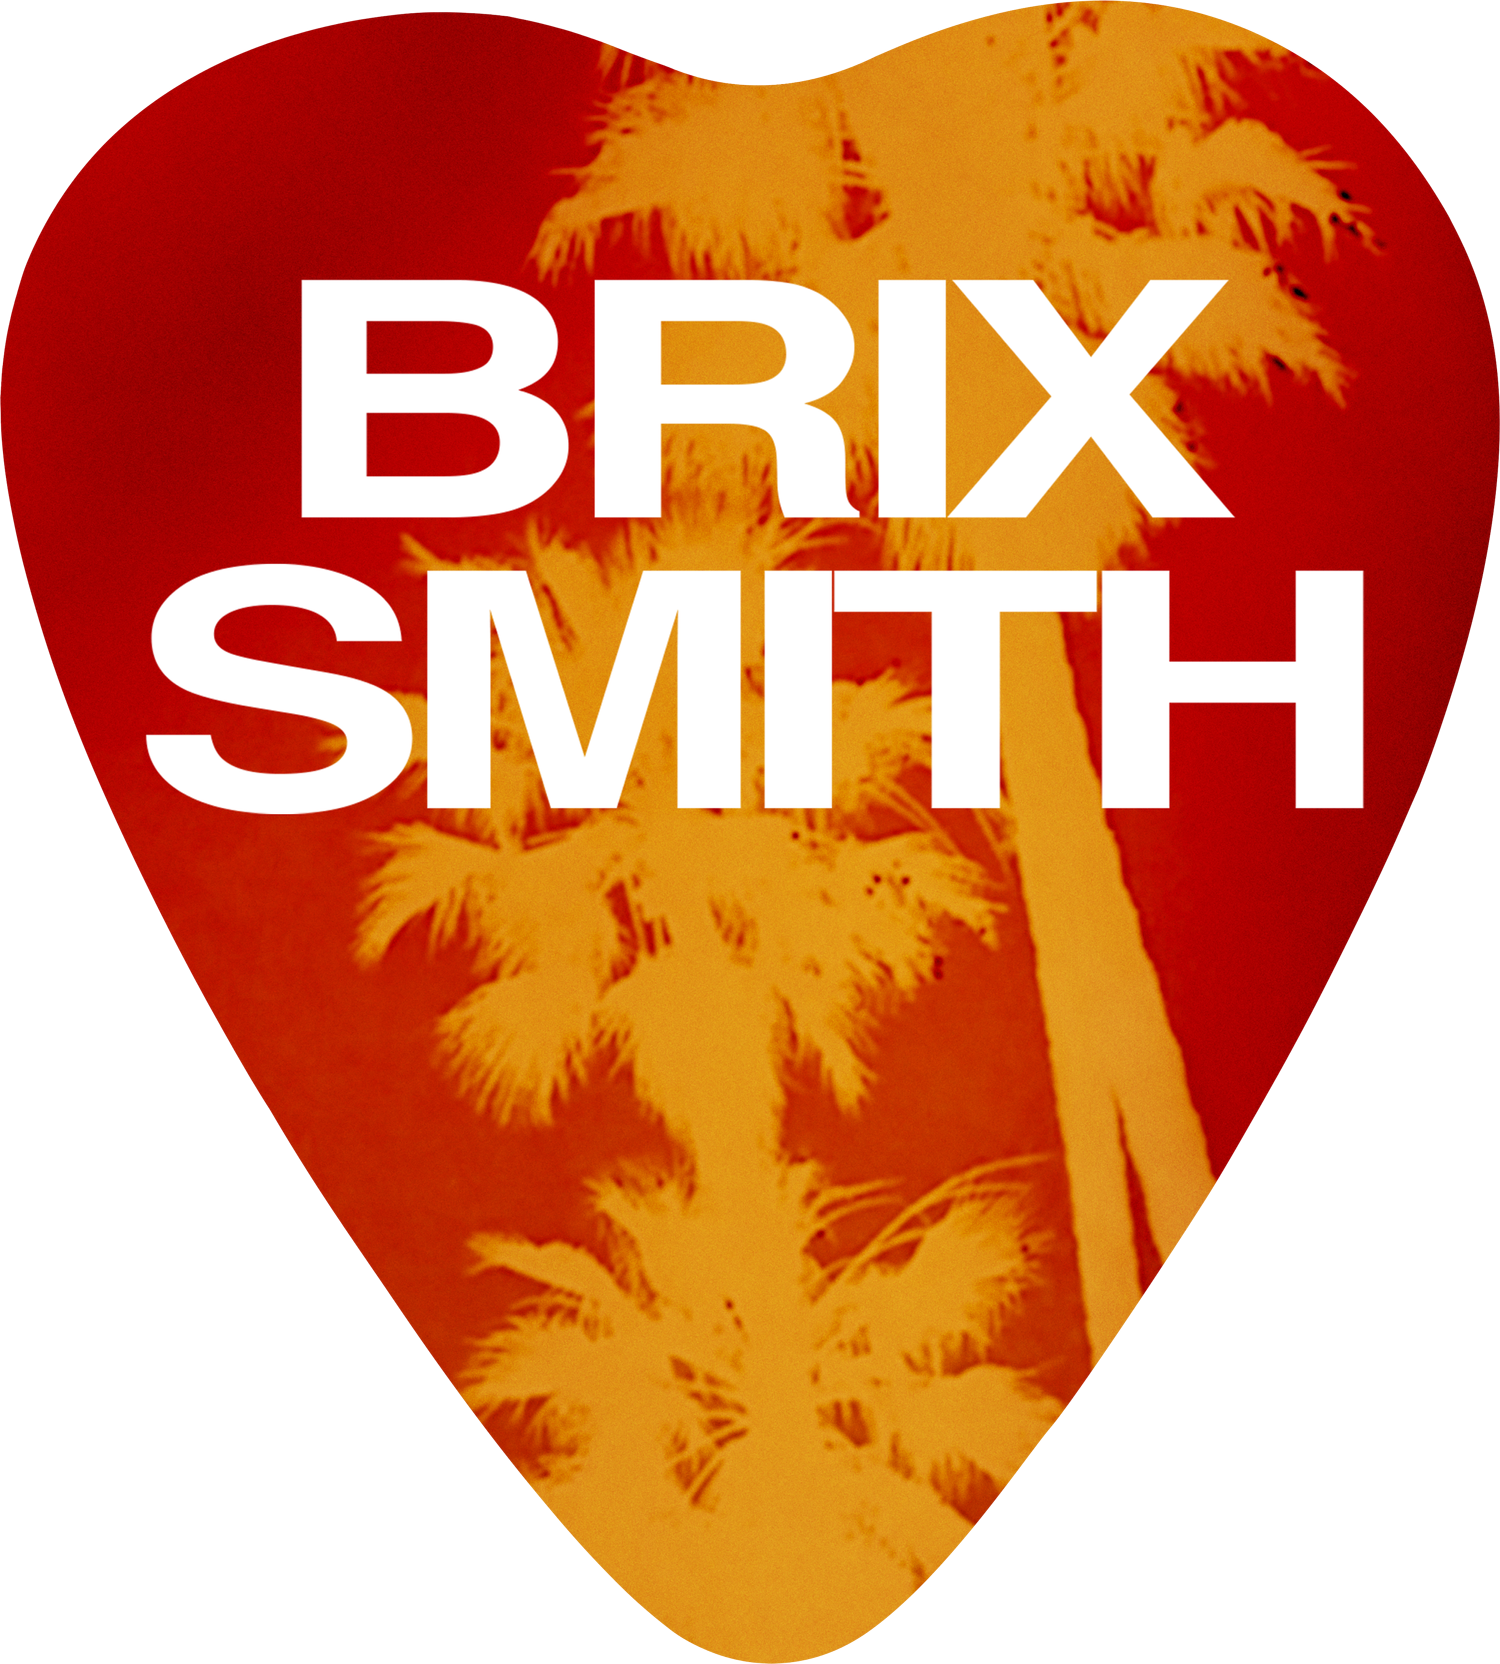 Brix Smith Official 